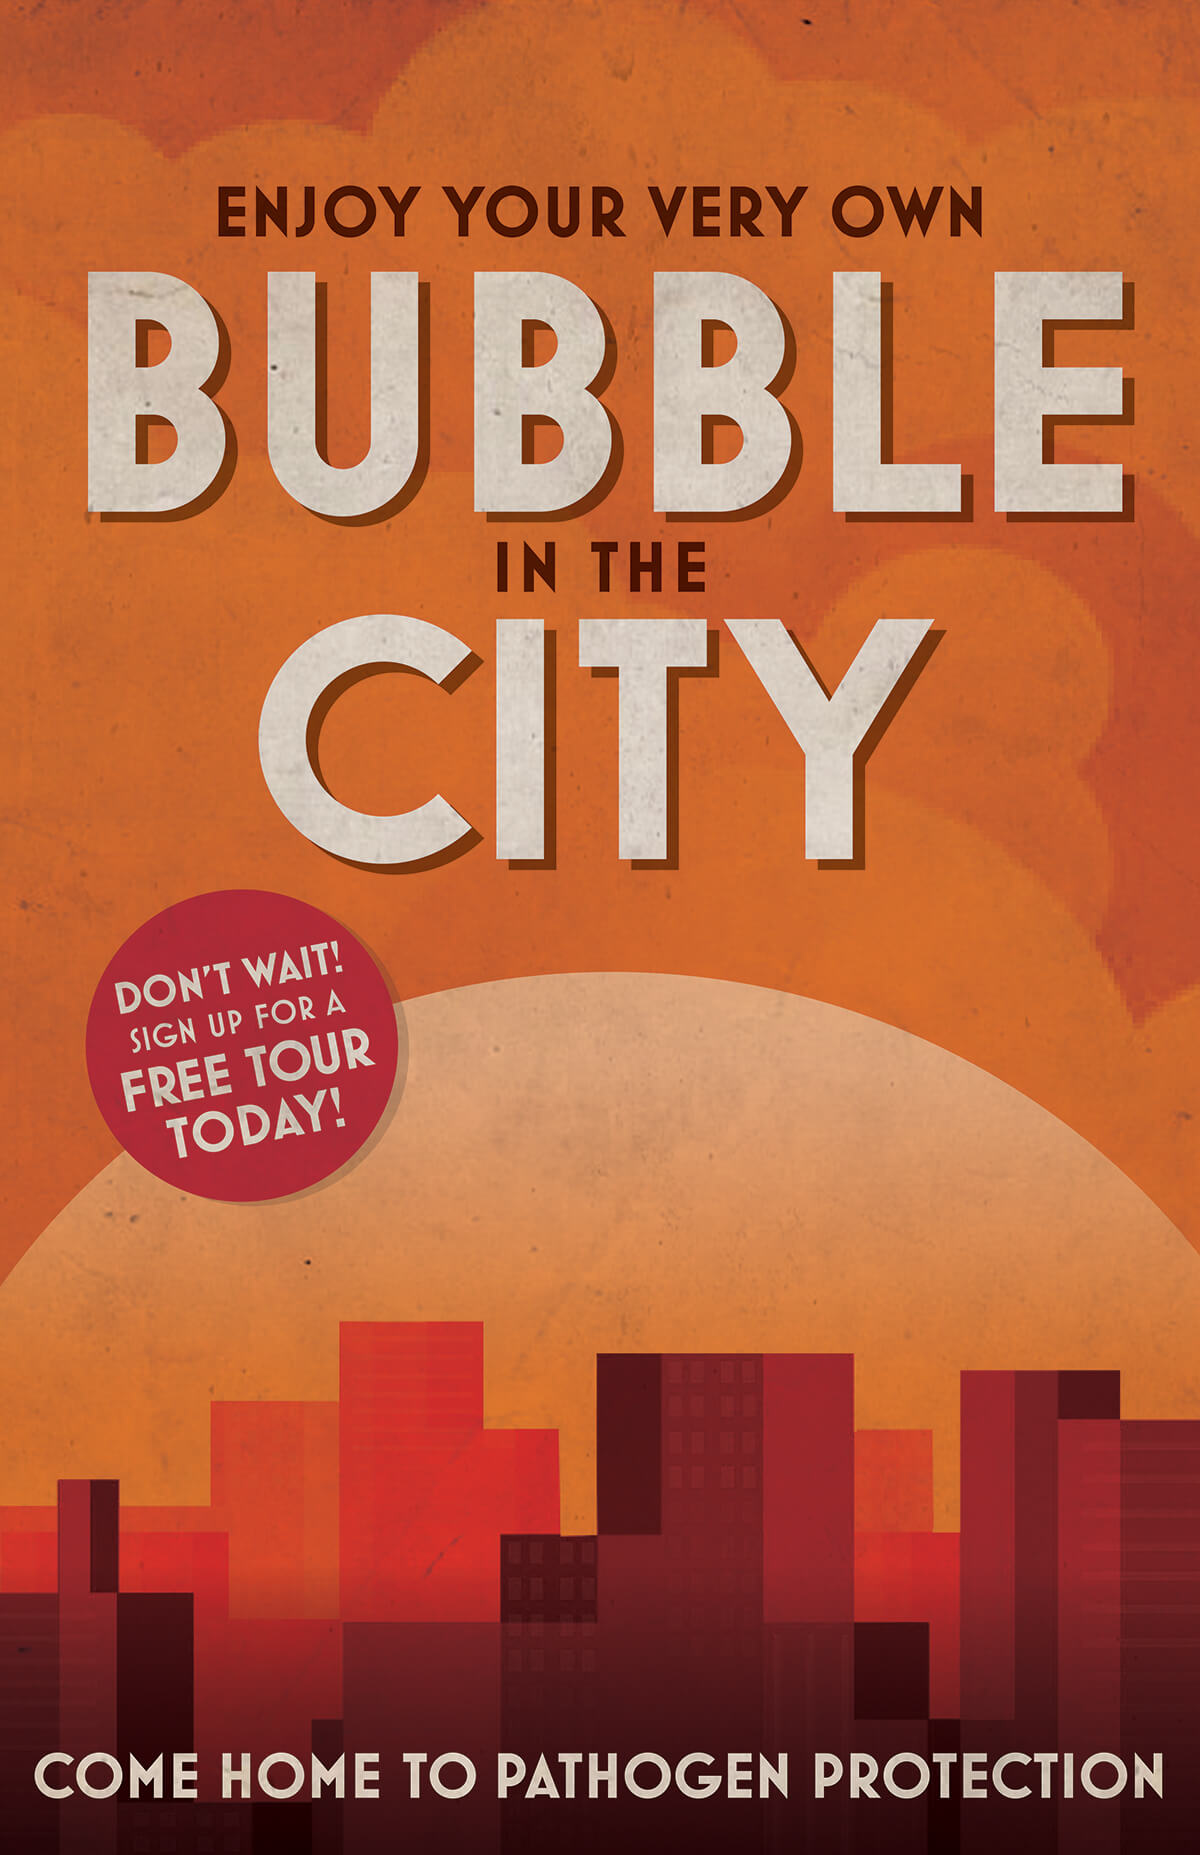 A mock travel poster with a city in a bubble.